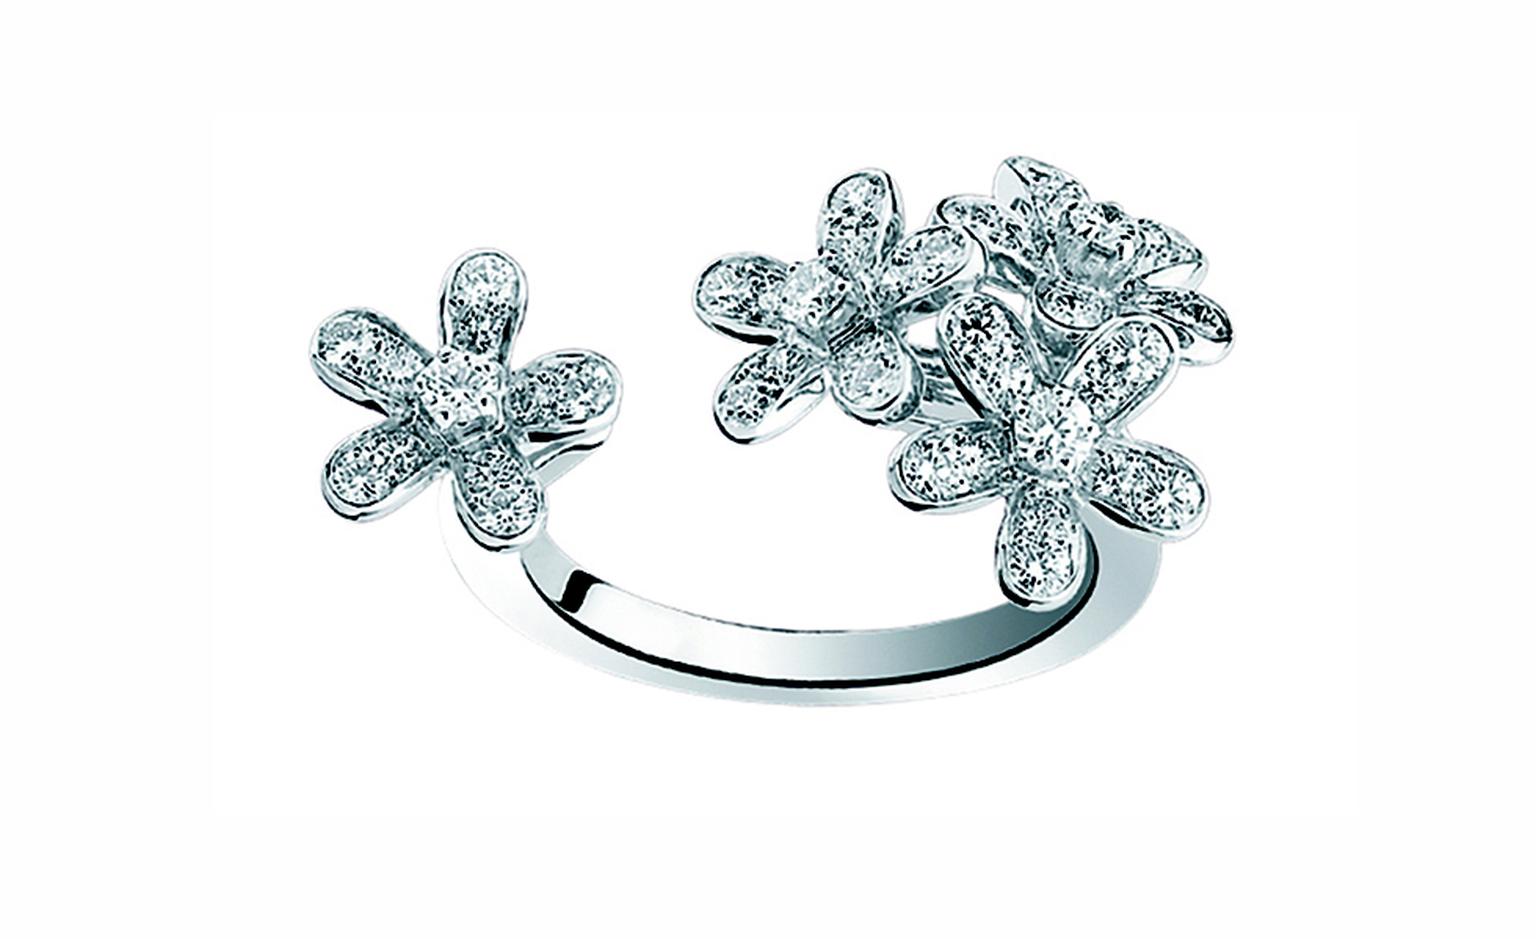 VAN CLEEF & ARPELS, Socrate between-the-finger ring, white gold and diamonds. Price from £7,250